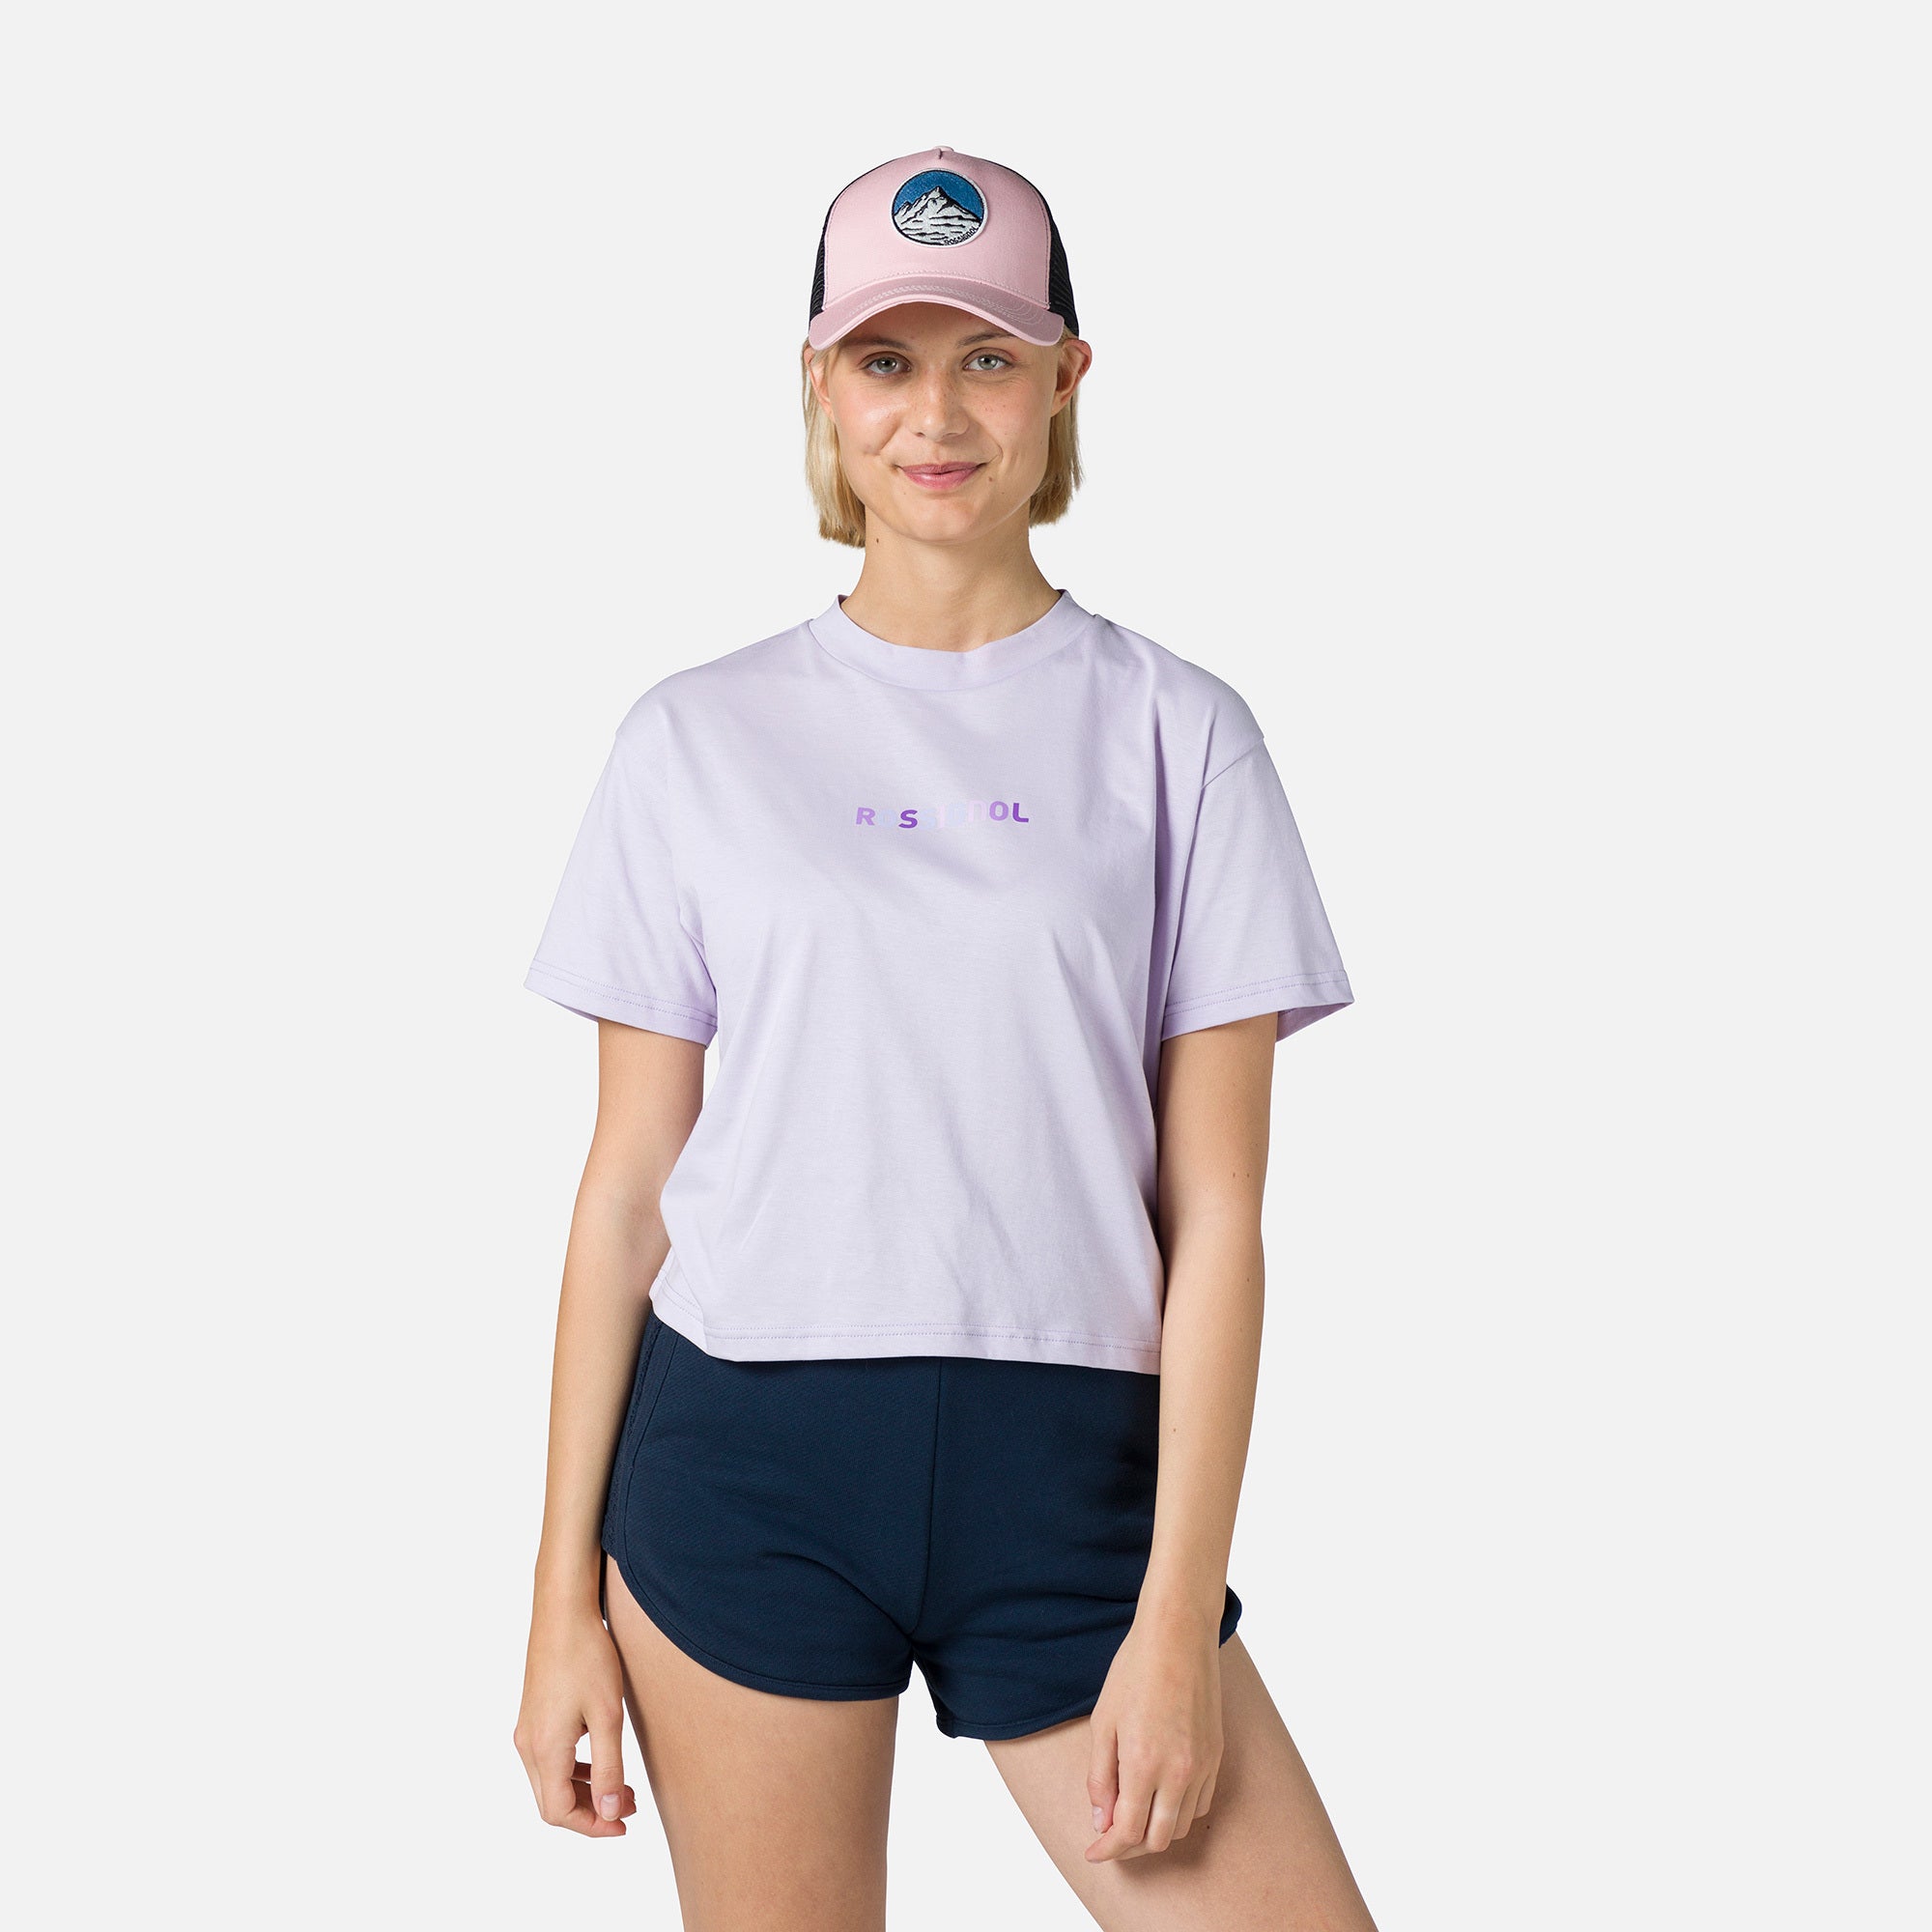 Women's Embroidery T-Shirt